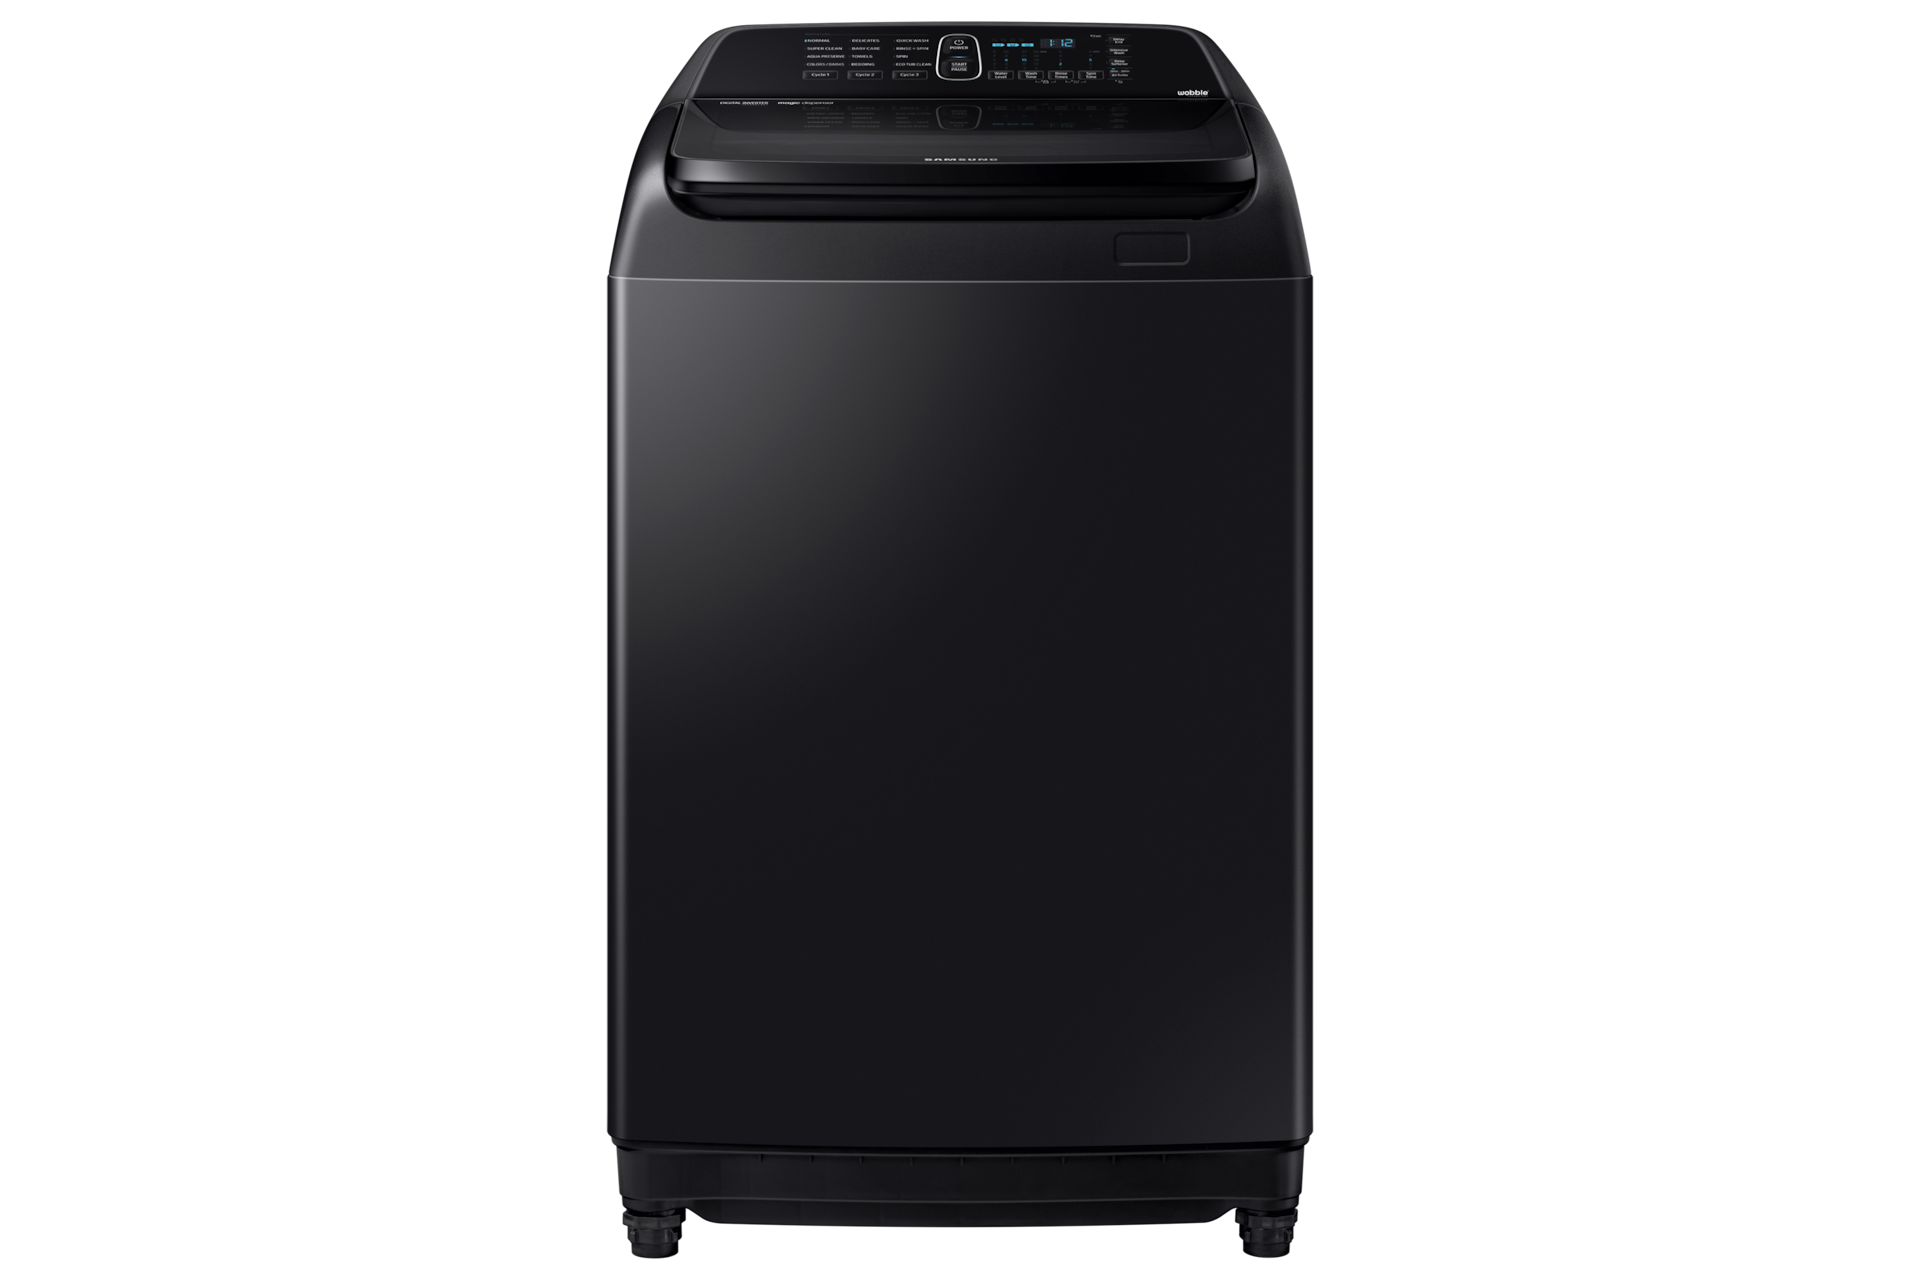 Whirlpool 8.0Kg Fully automatic Top Load Washing Machine, Xpert